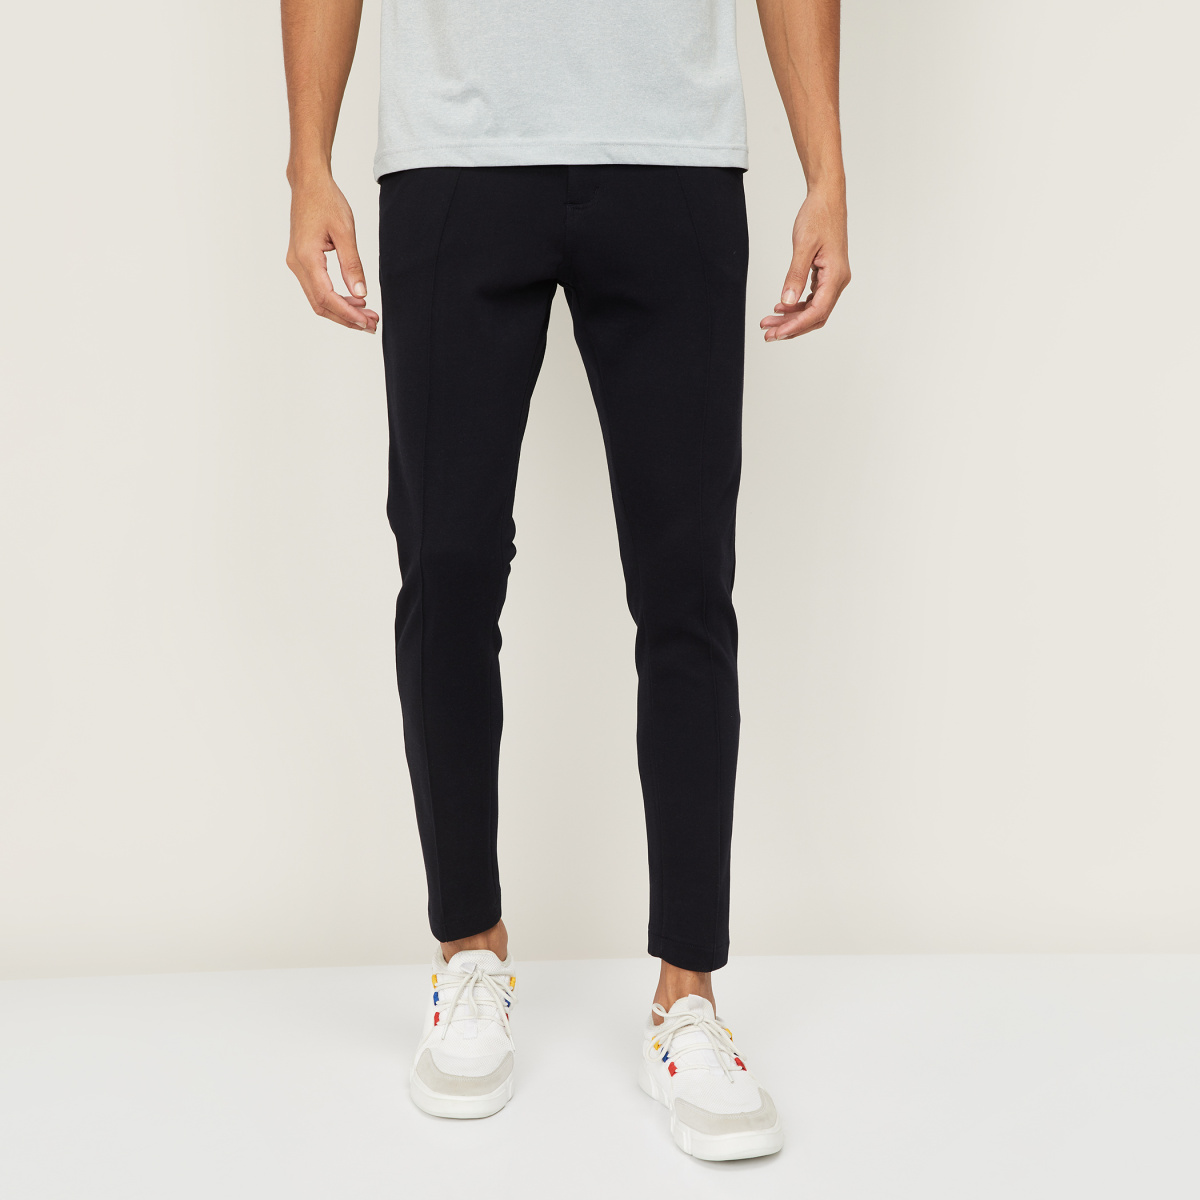 Grey Solid Trackpants - THE DEAL APP | Get Best Deals, Discounts, Offers,  Coupons for Shopping in India